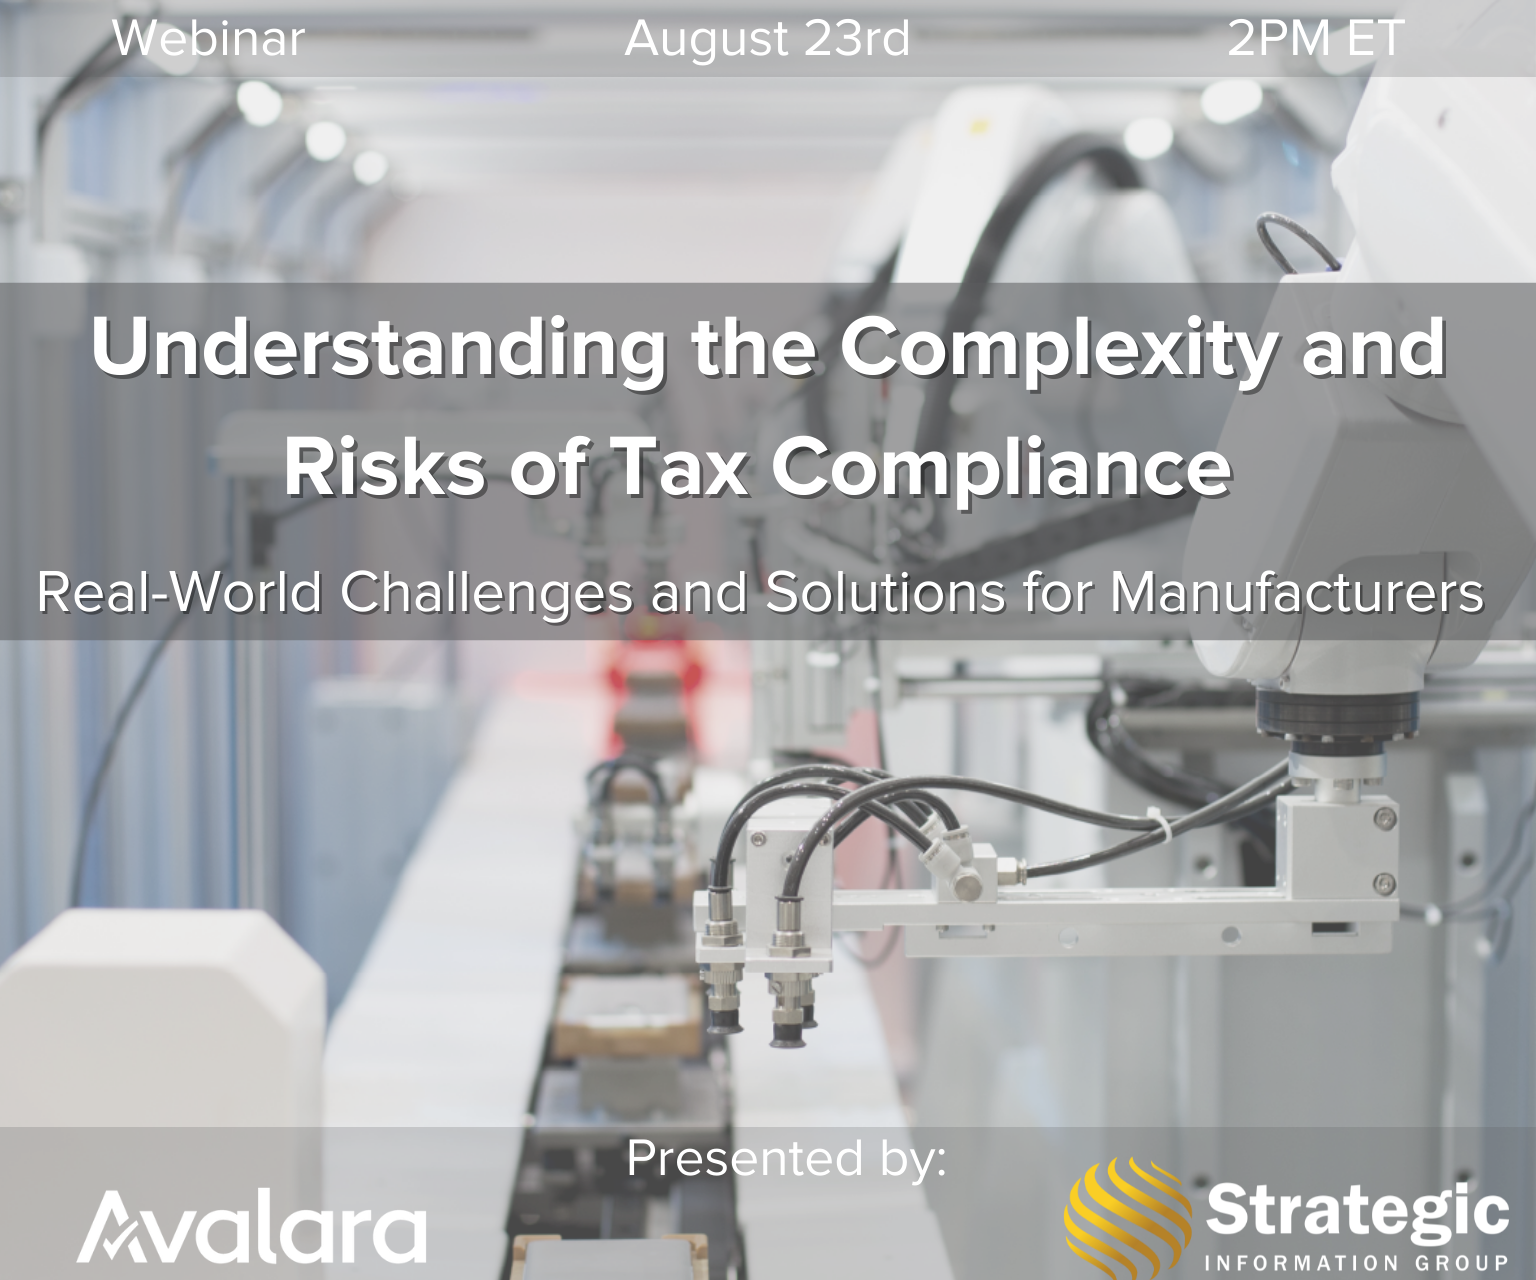 Webinar: Understanding the Complexity and Risks of Tax Compliance